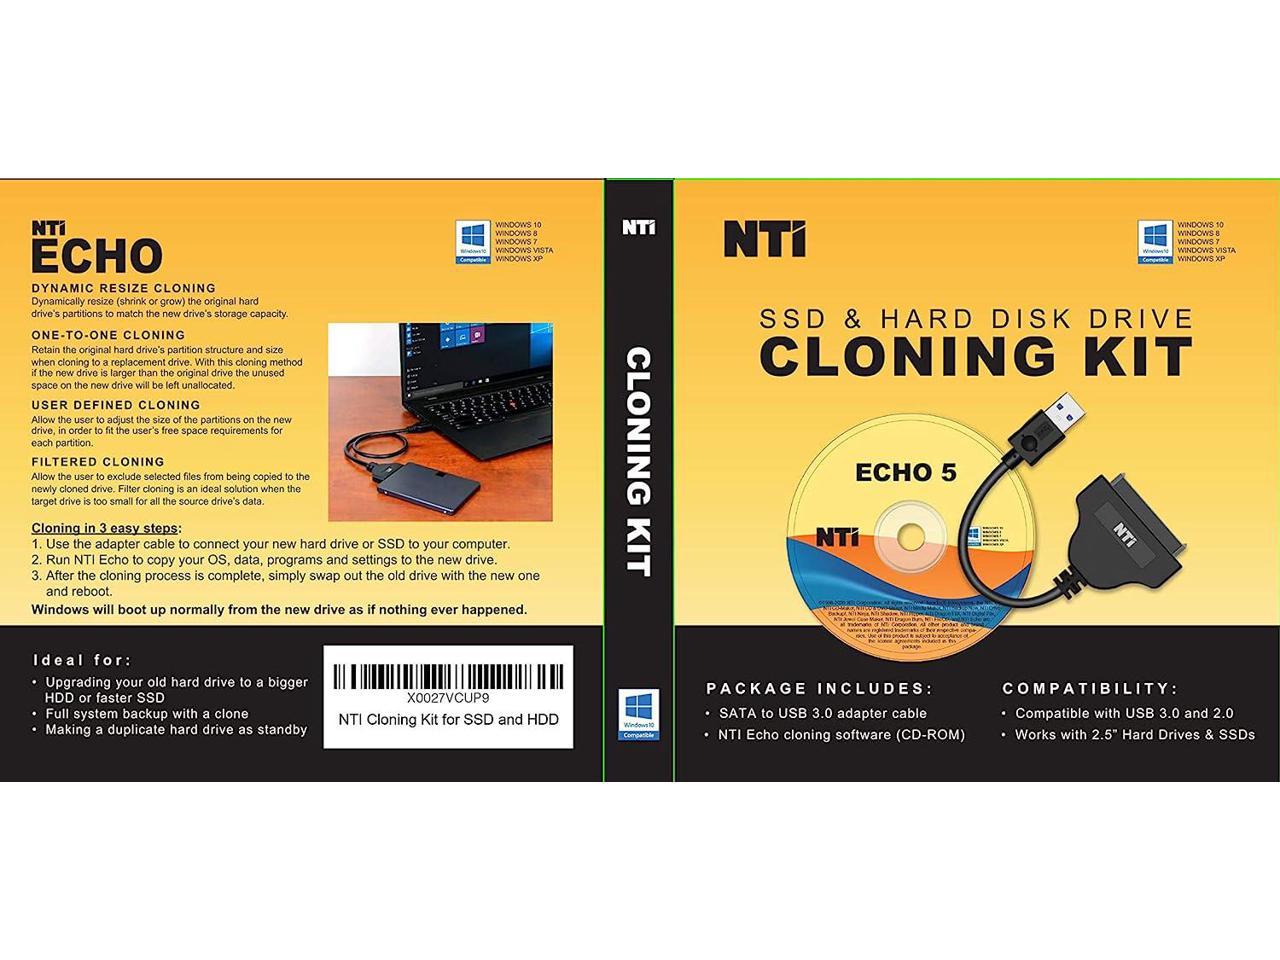 relieve consumer Funeral NTI Cloning Kit | Best for SSD and HDD Upgrades | Software via Download and  CD-ROM | SATA-to-USB 3.0/2.0 Adapter Included - Newegg.com